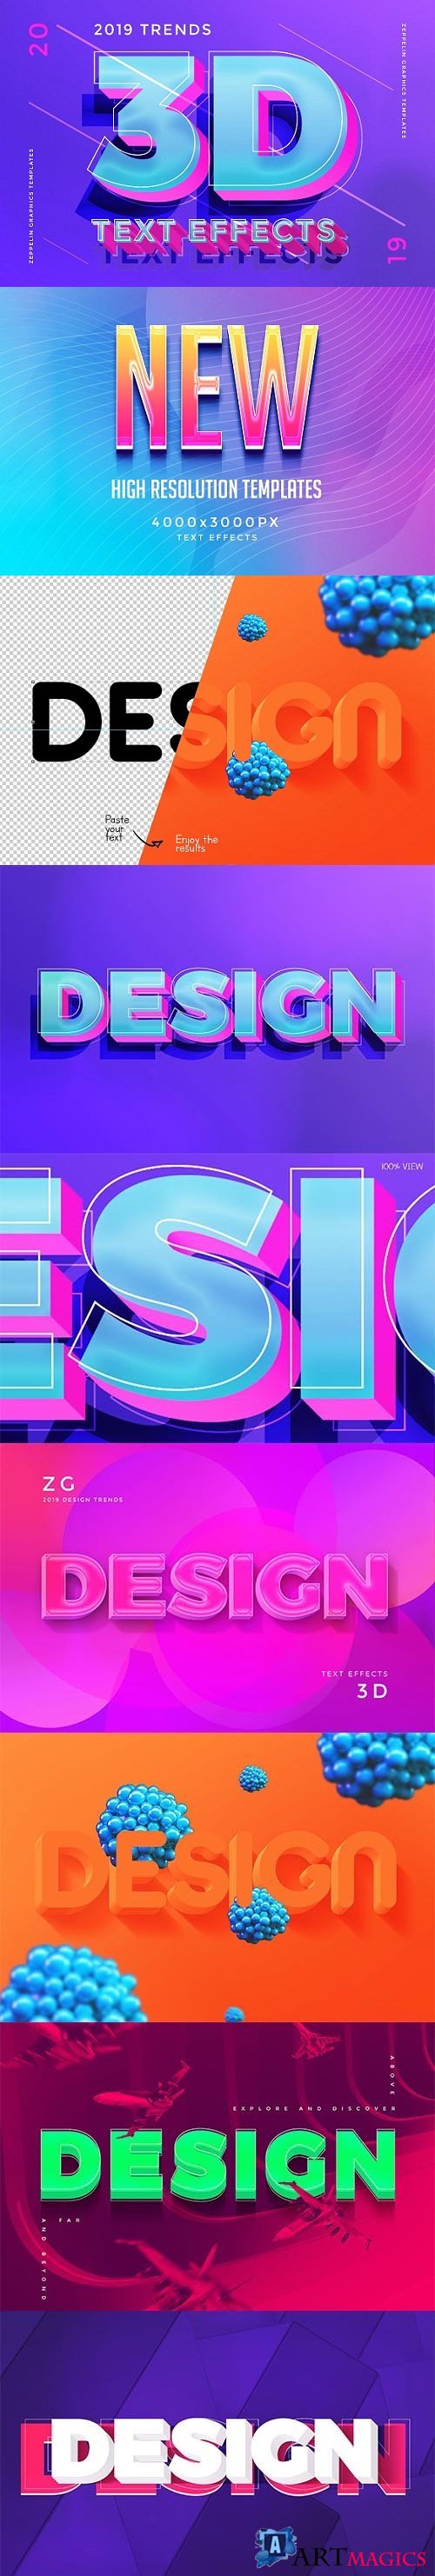 3D Text Effects 2019 Trends - 3350196